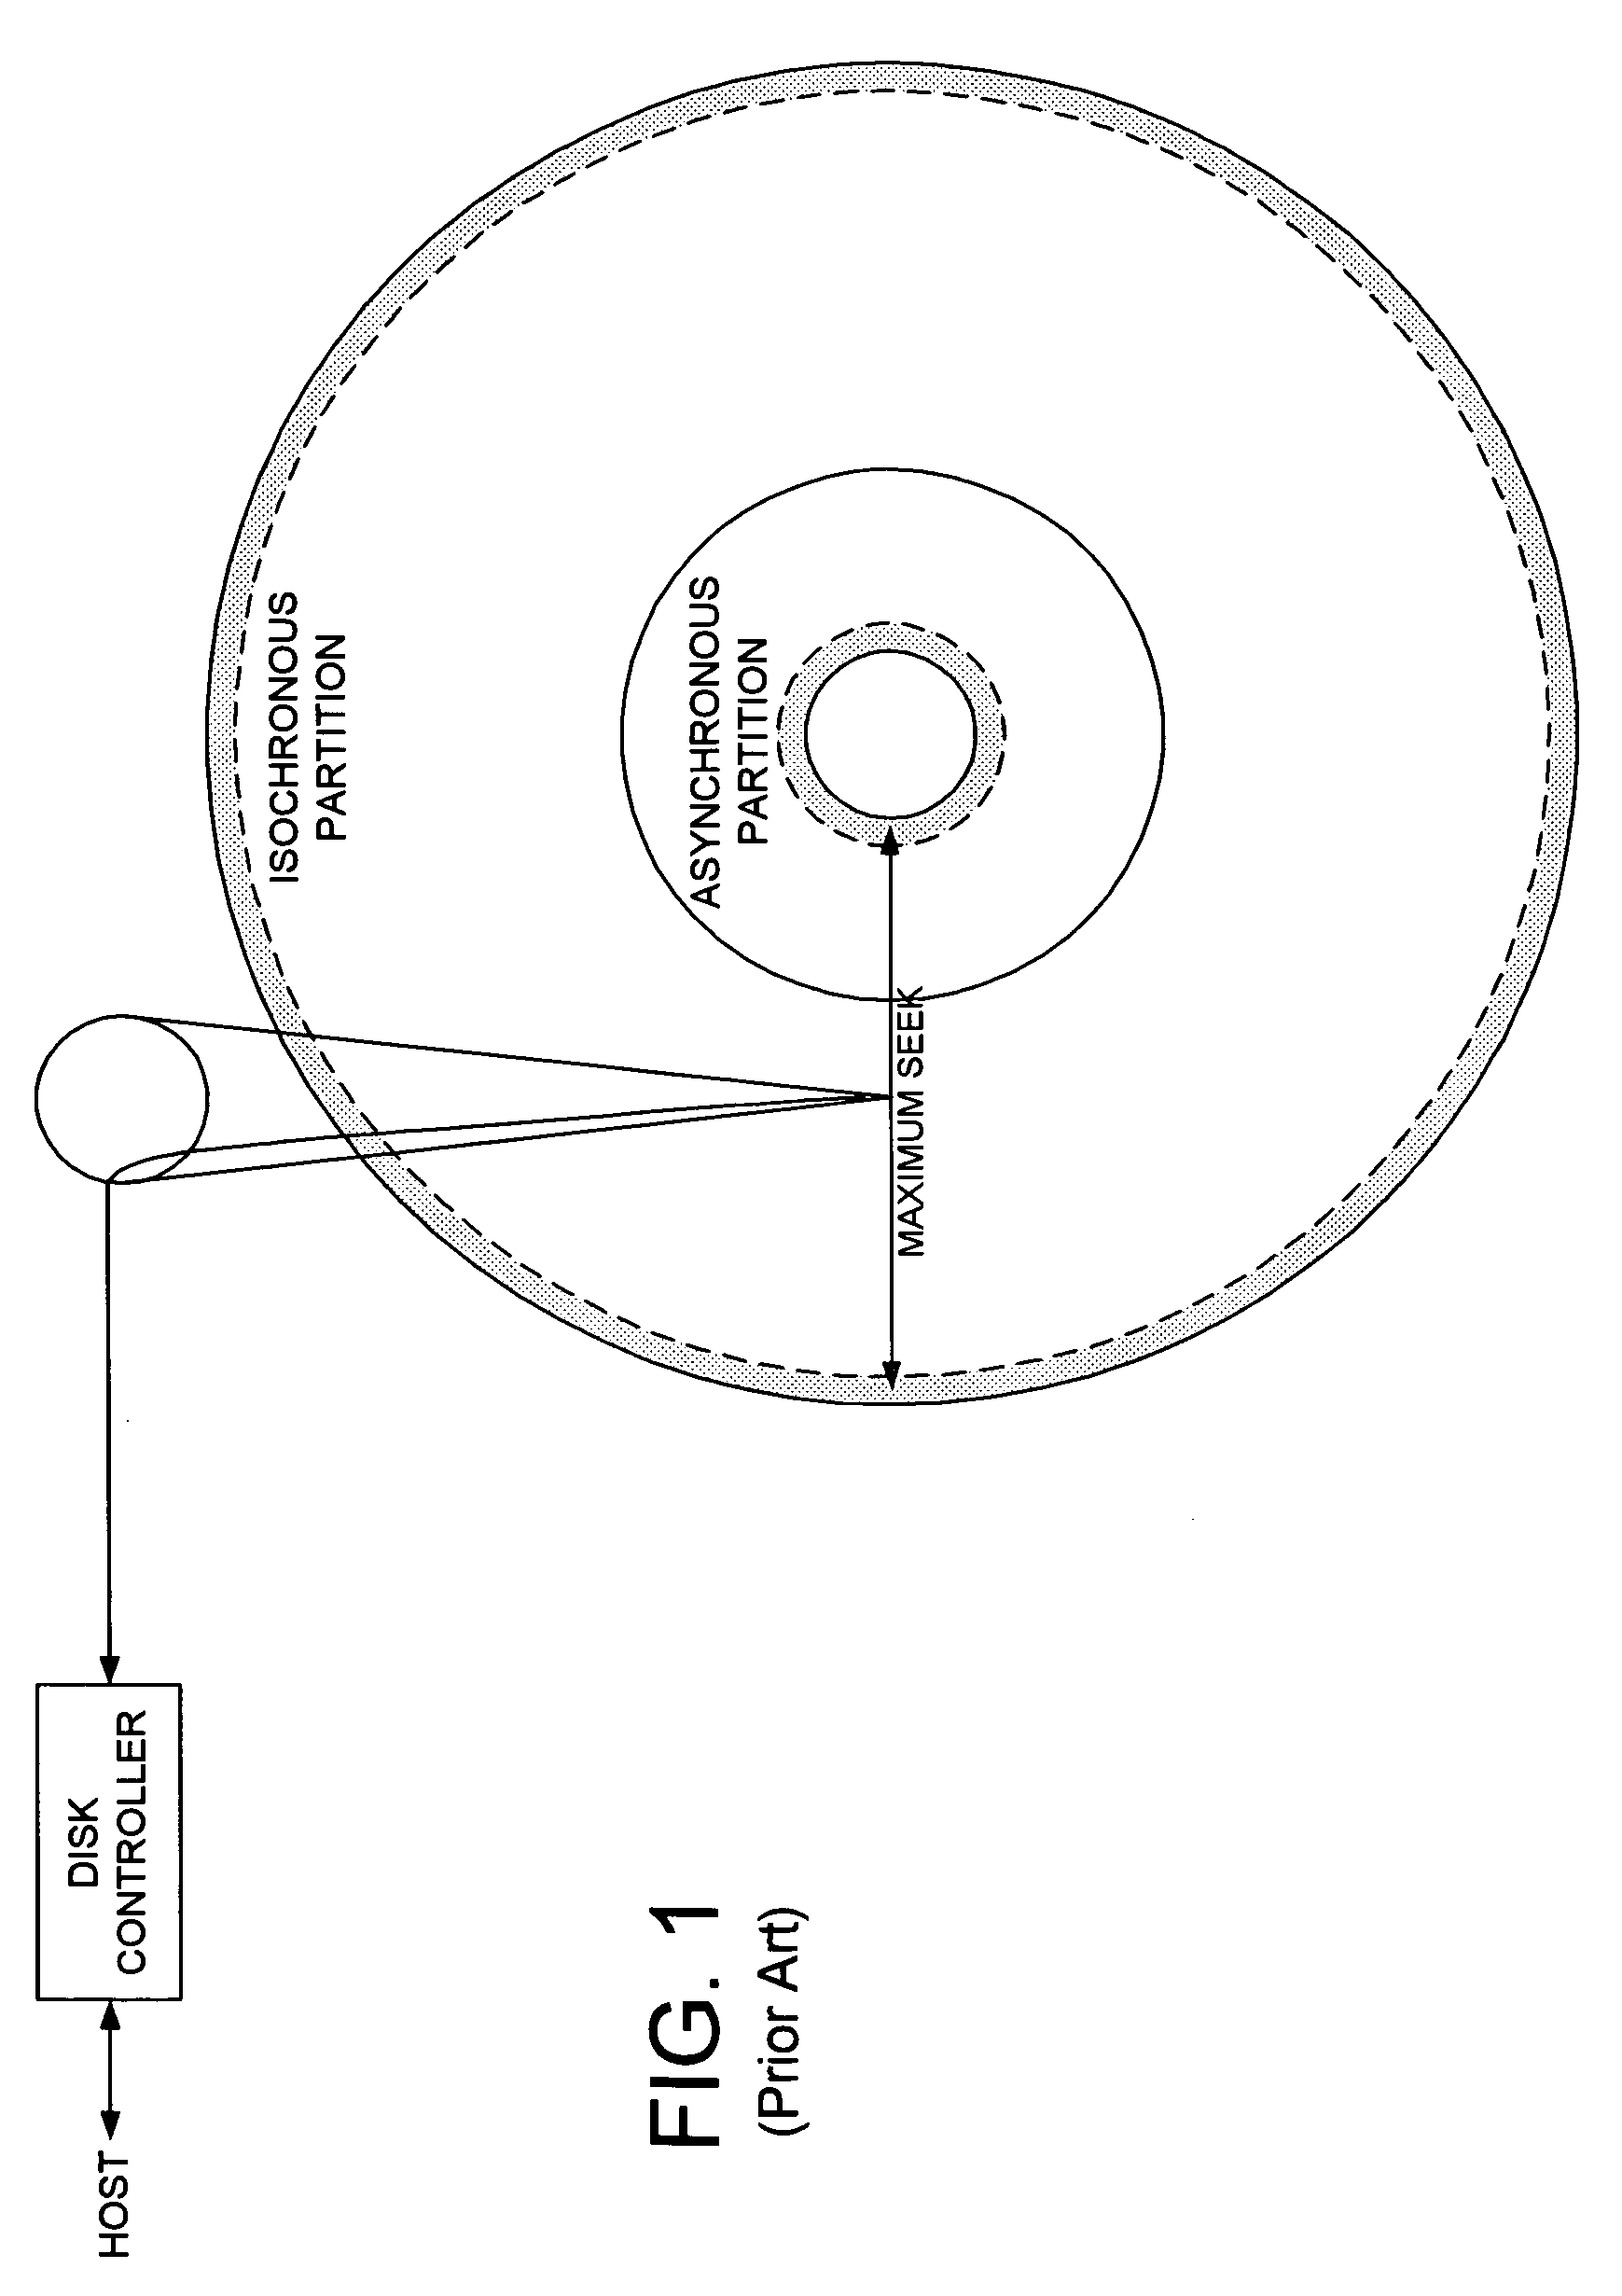 Disk drive comprising an asynchronous partition located on a disk between two isochronous partitions